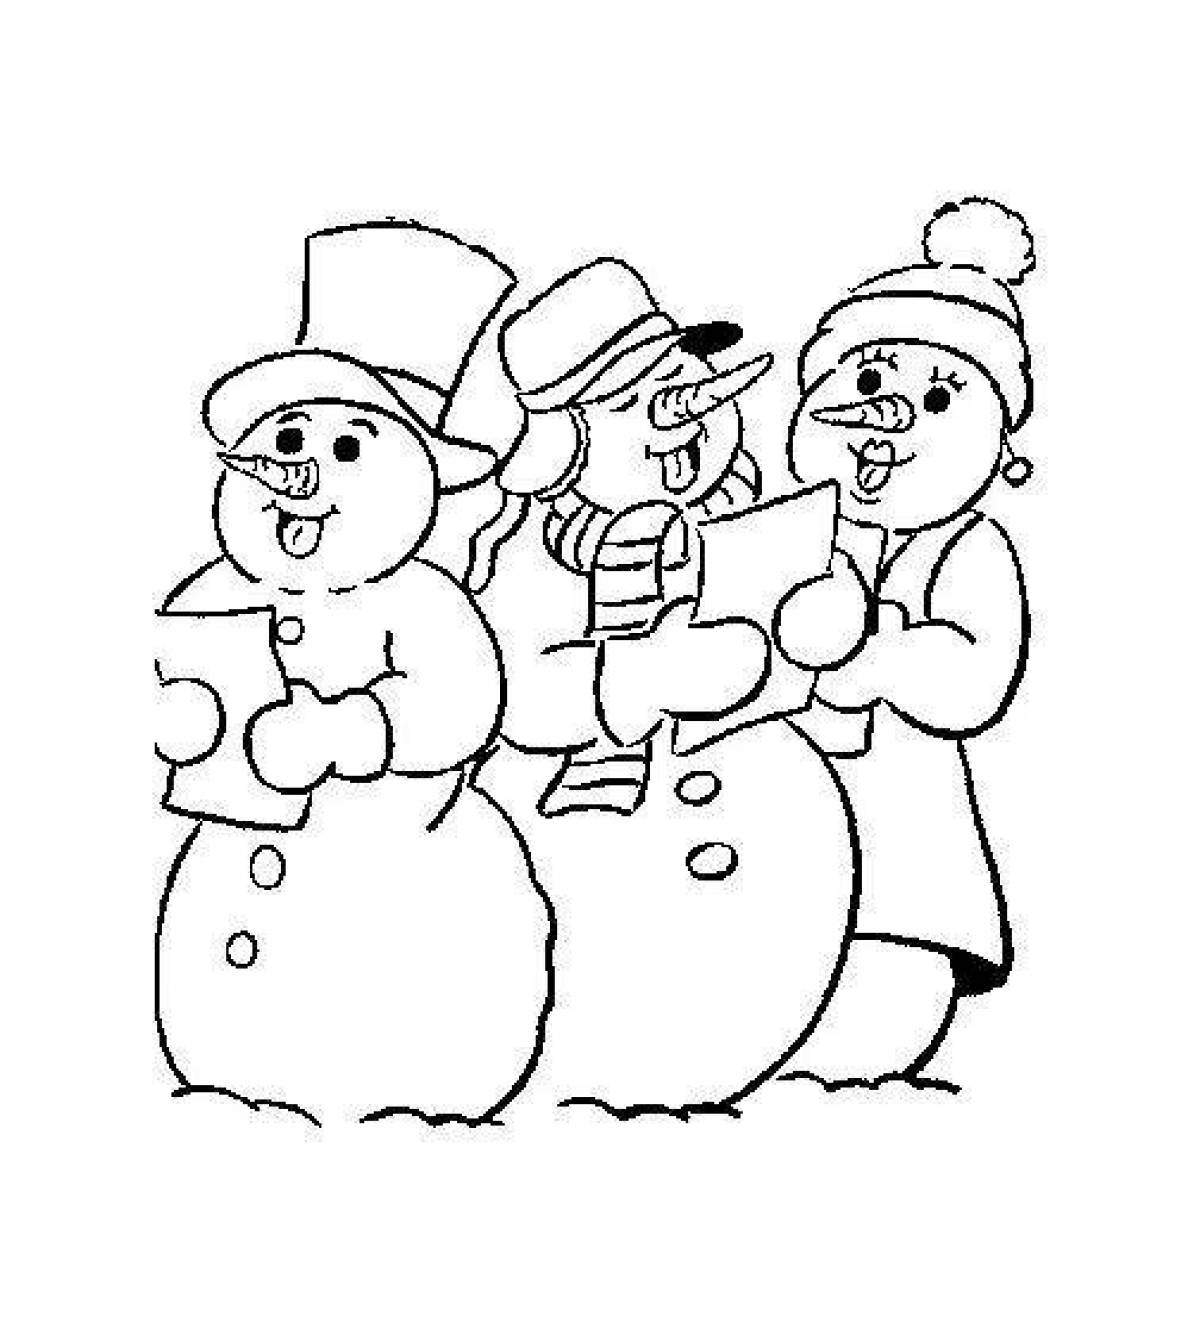 Glorious carol coloring pages for preschoolers